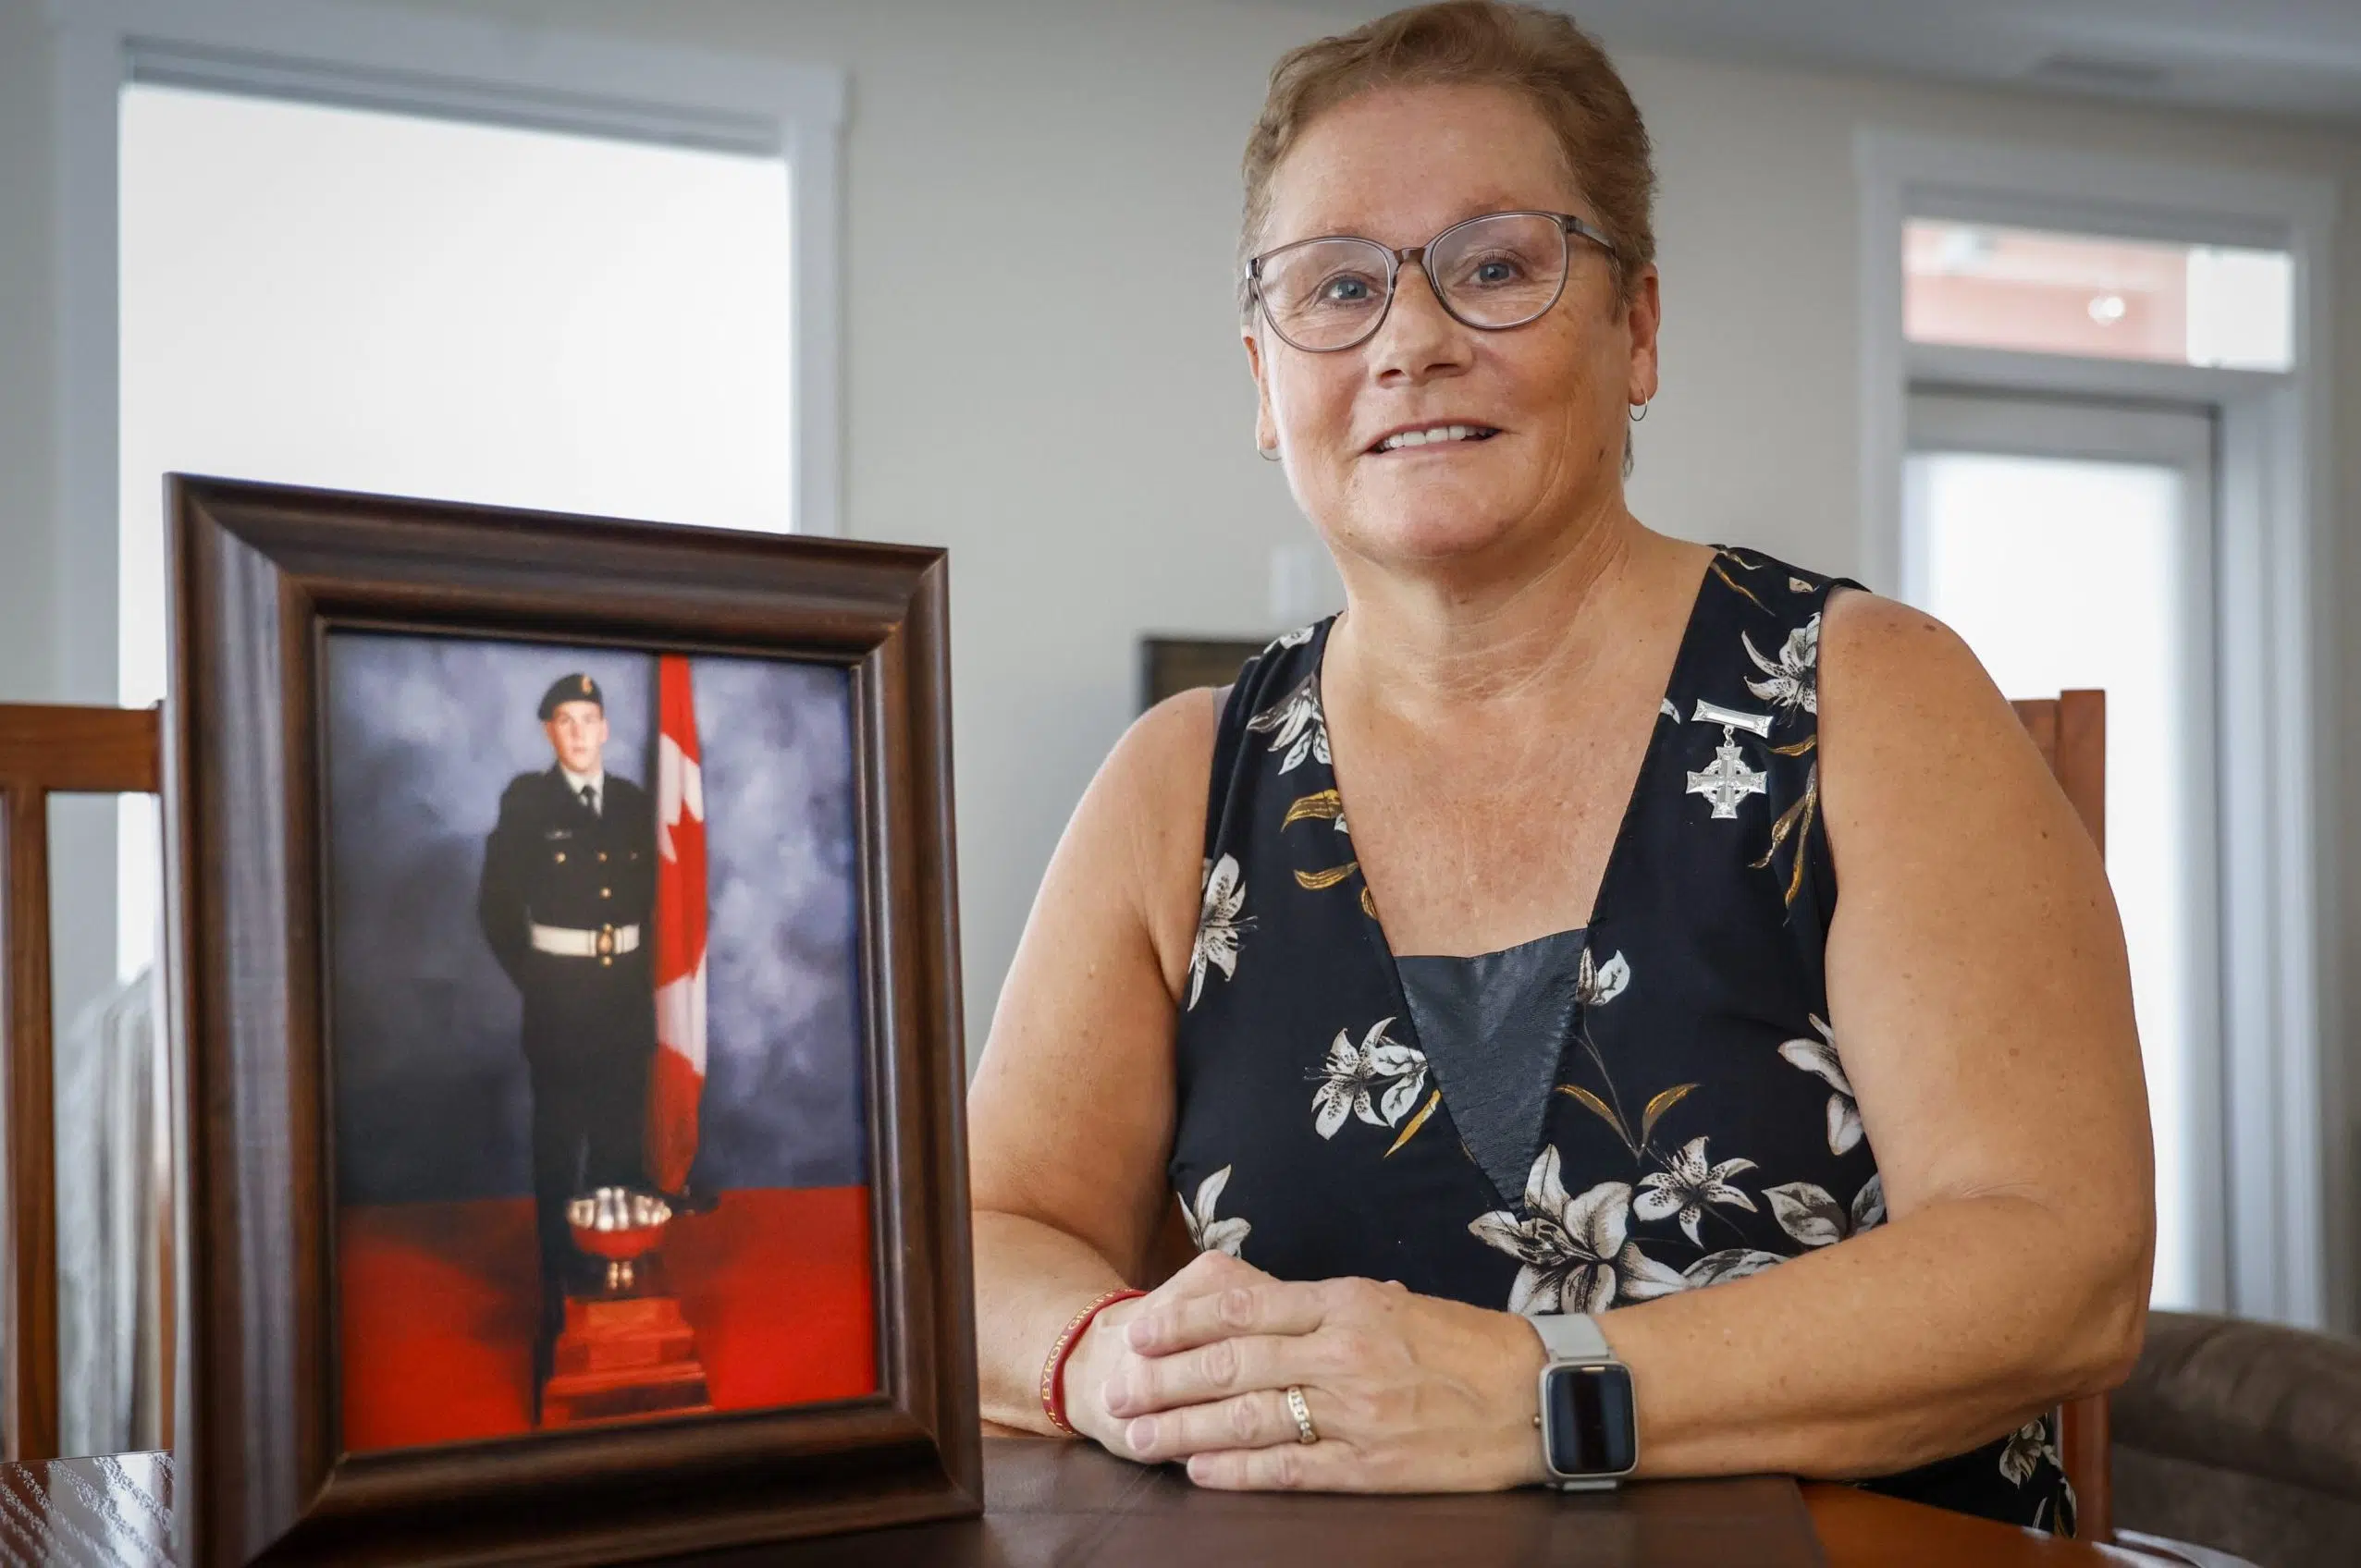 Silver Cross Mother honoured to represent families on Remembrance Day